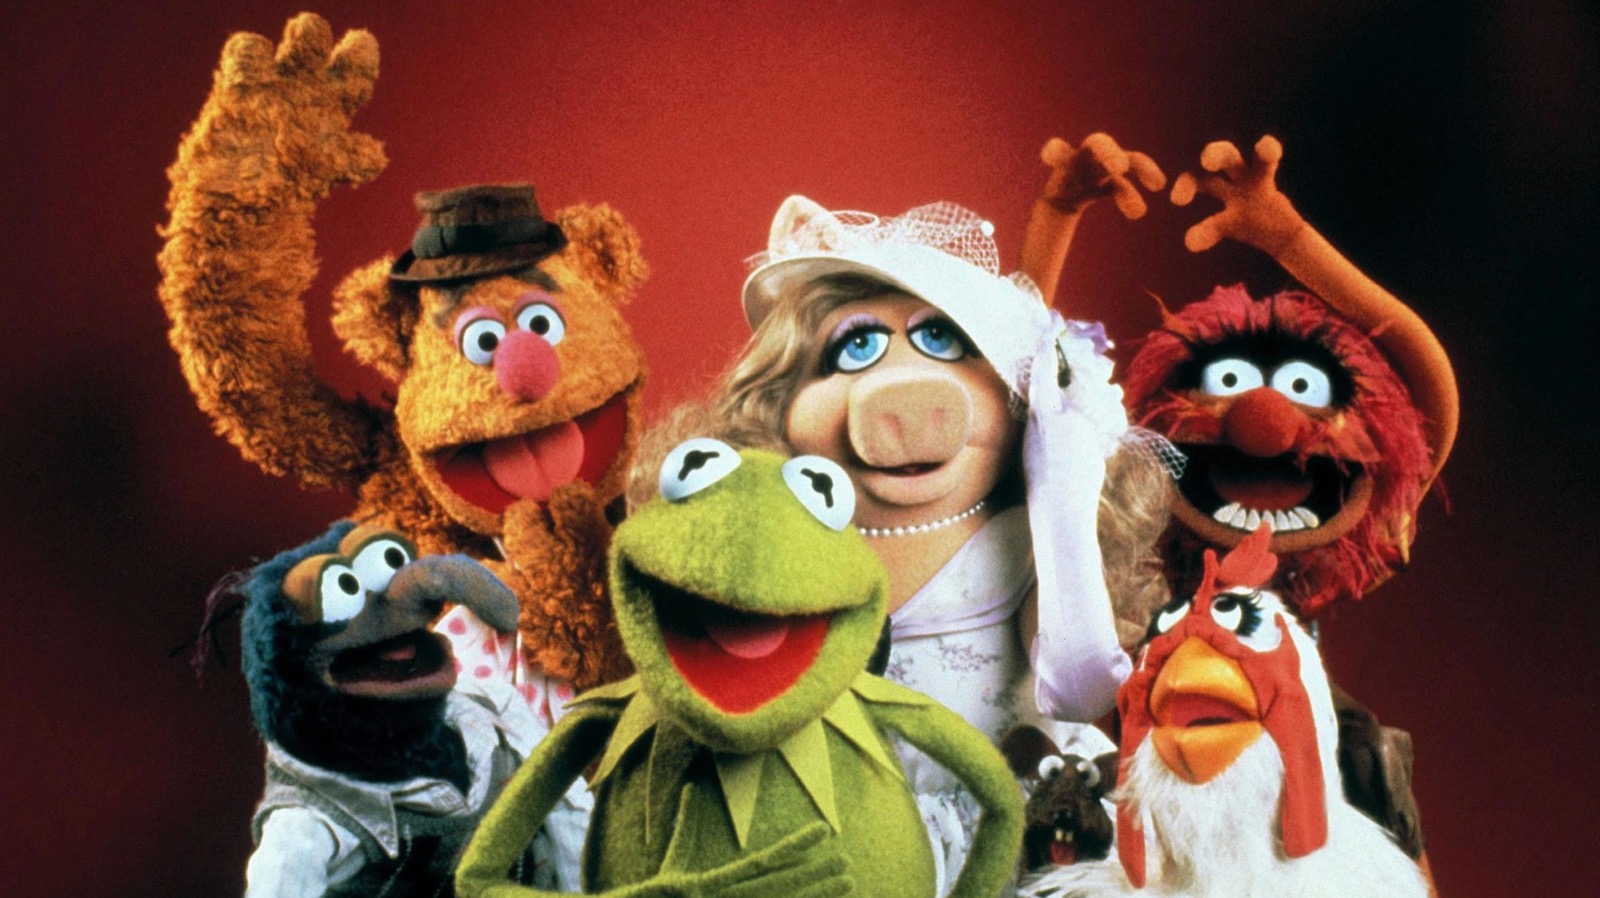 The Hardest Game of “Which Must Go” For Anyone Who Loves Classic TV The Muppet Show